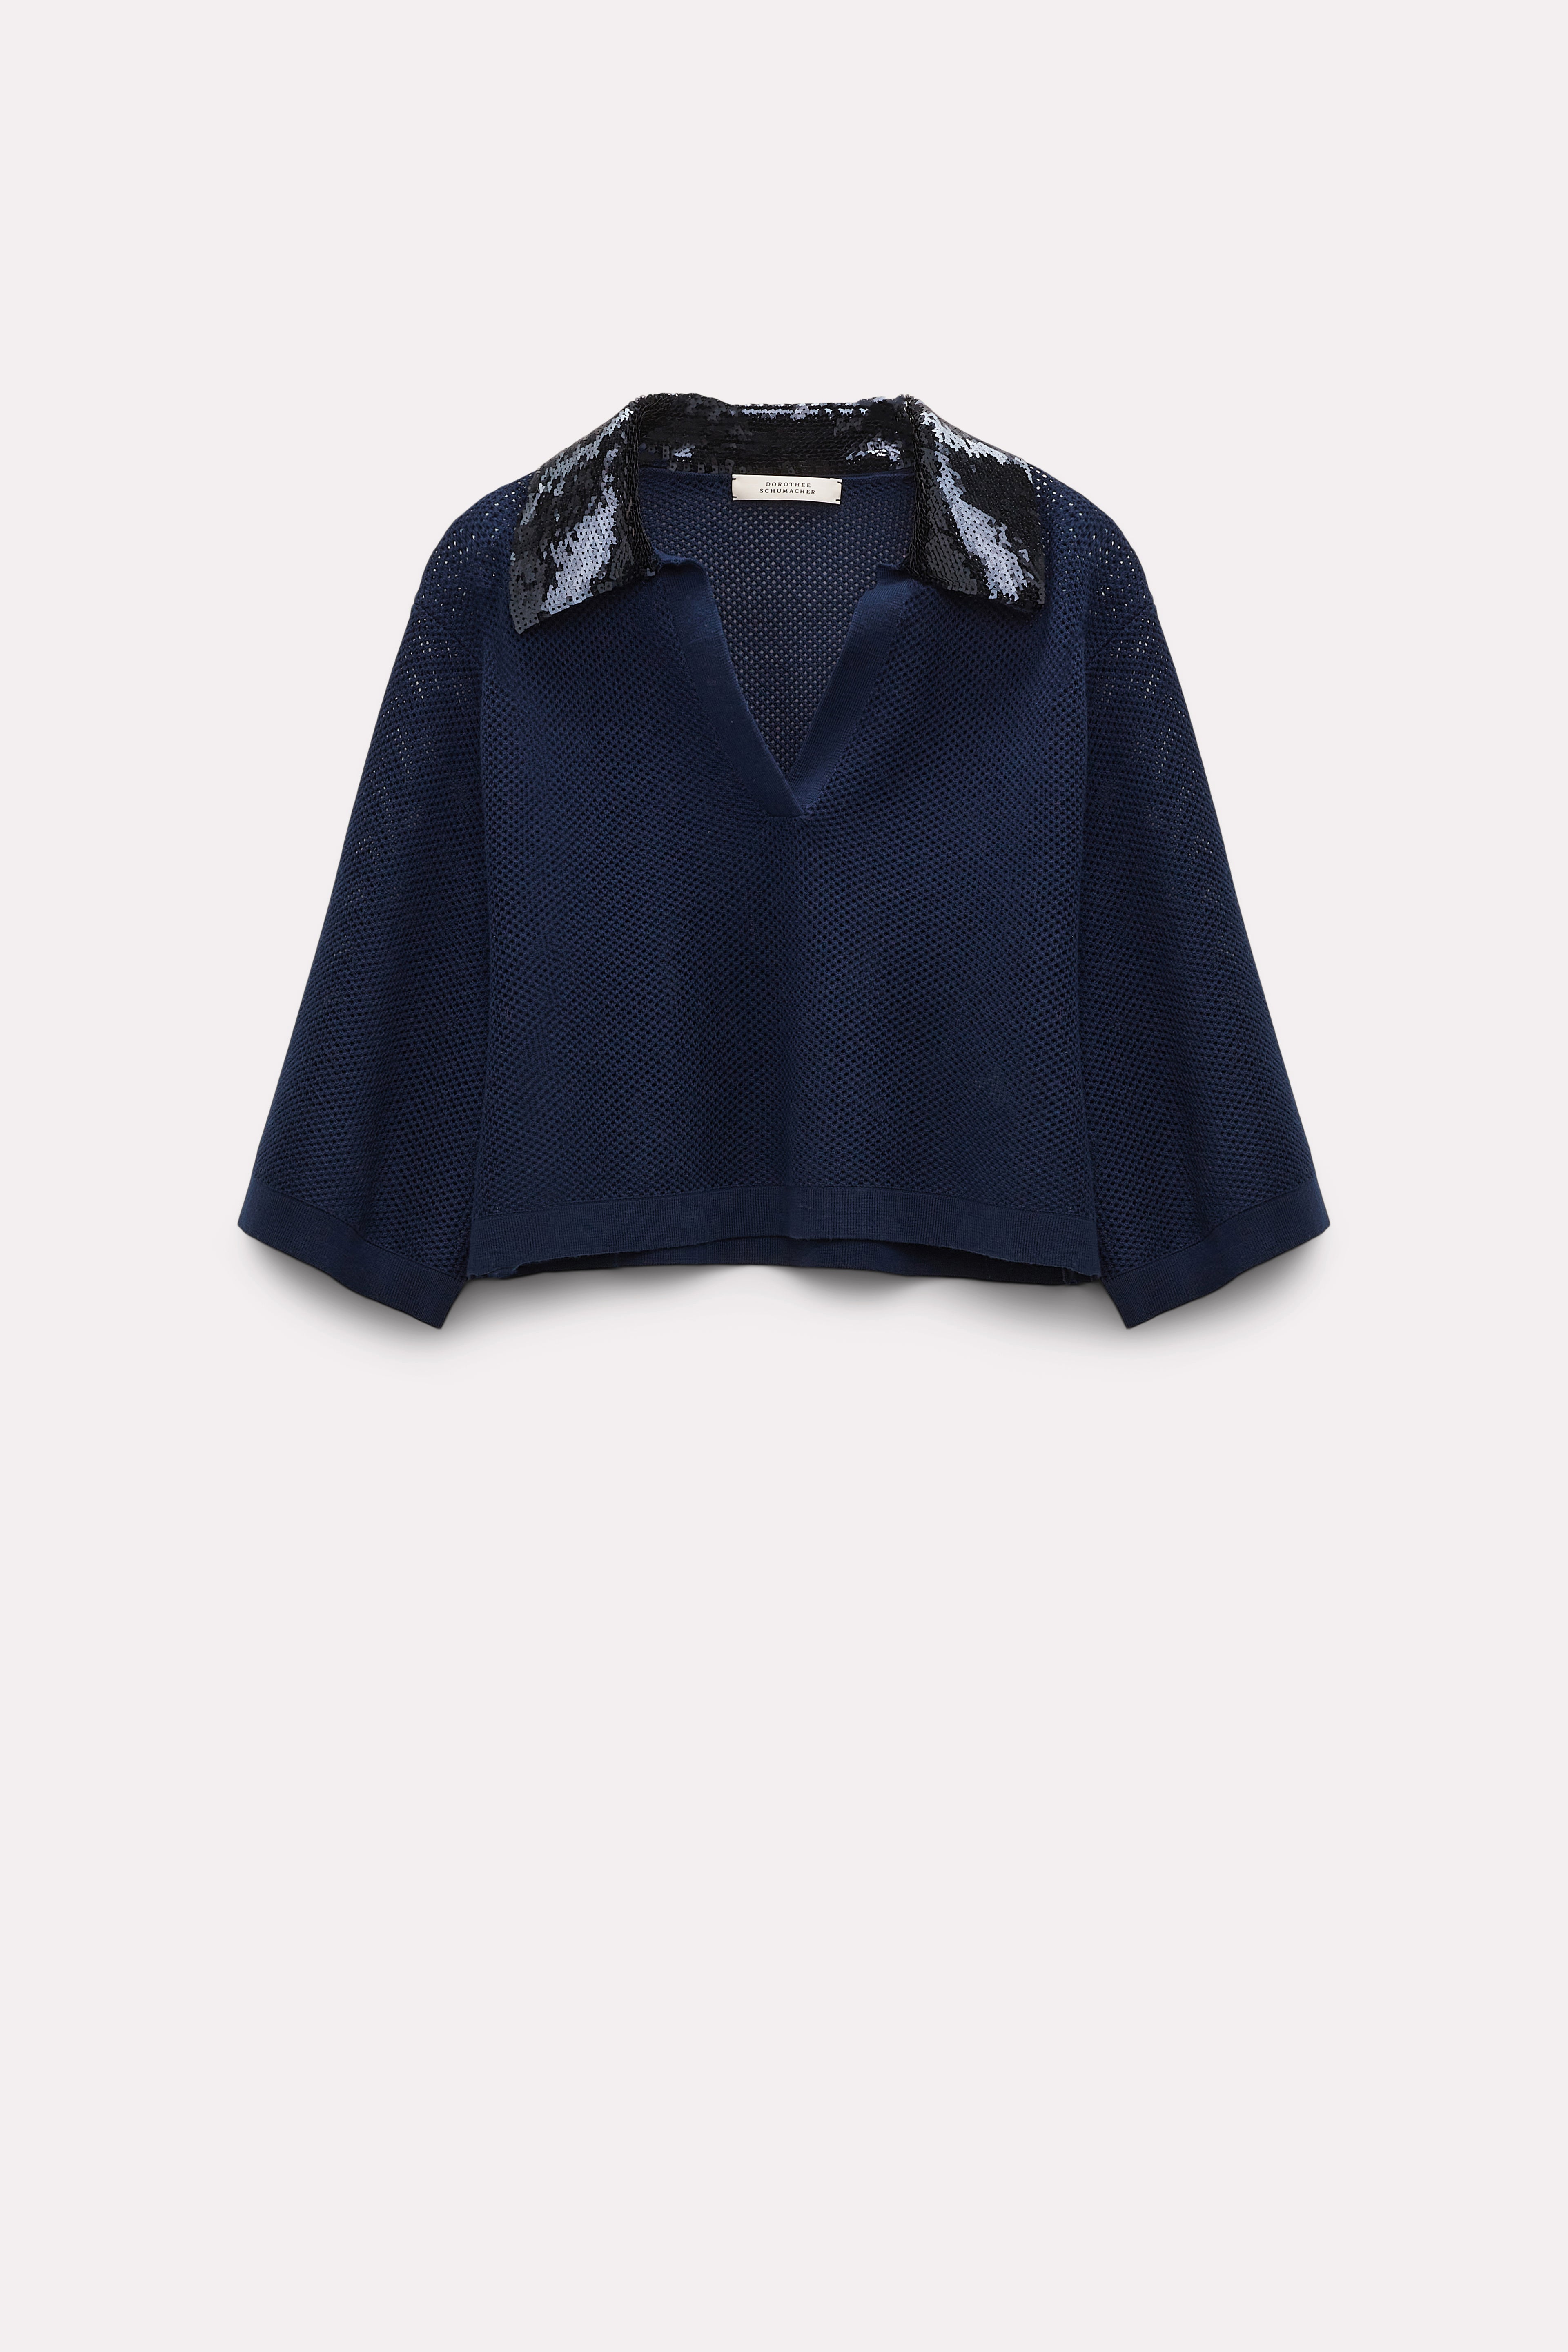 Dorothee-Schumacher-OUTLET-SALE-ESSENTIAL-EASE-pullover-Strick-ARCHIVE-COLLECTION_4f8db948-93d9-464d-a4e2-5fd9ffd19caa.jpg